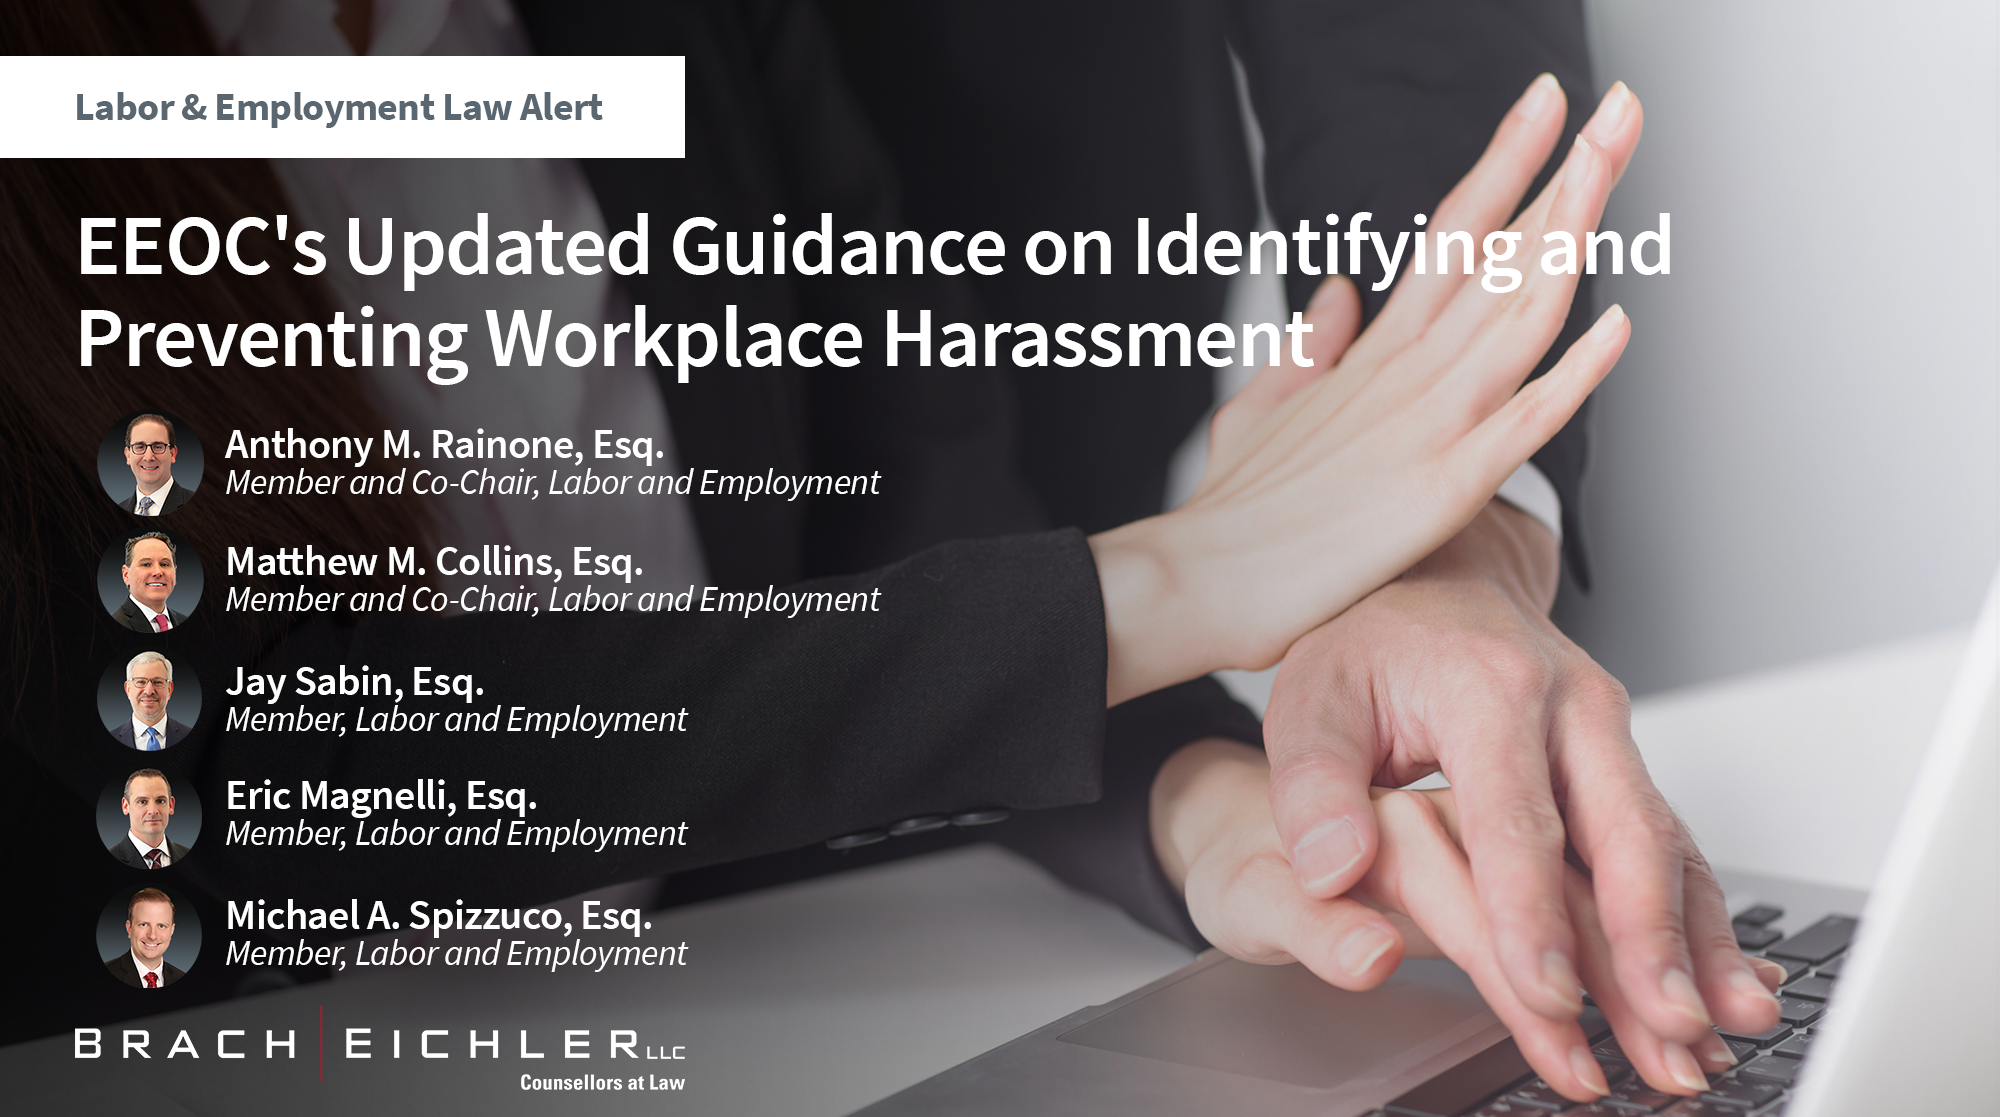 EEOC's Updated Guidance on Identifying and Preventing Workplace Harassment - Labor and Employment Alert - Brach Eichler